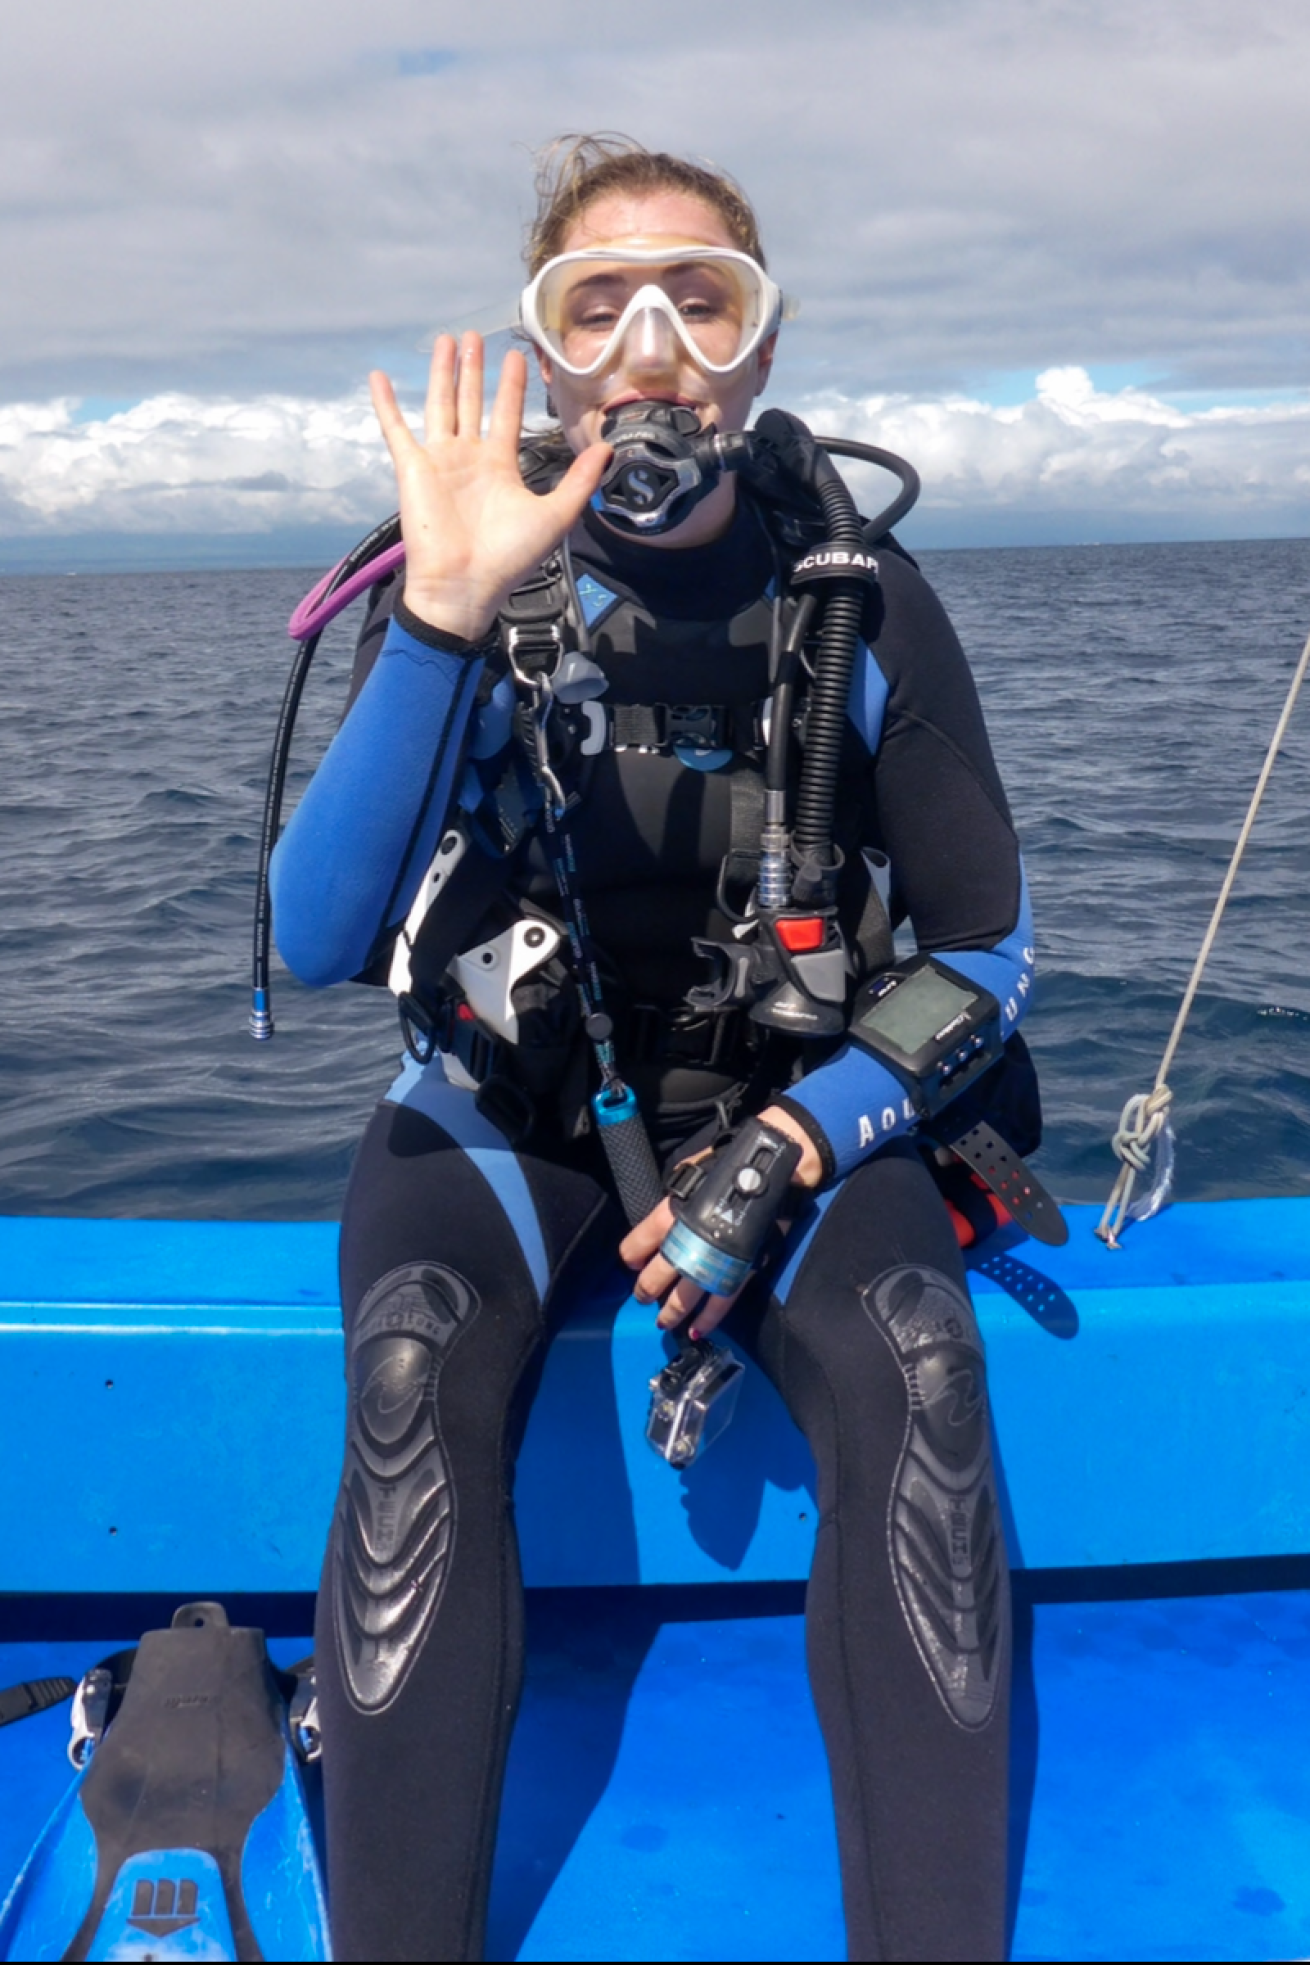 Diver is set for her dive from a boat.